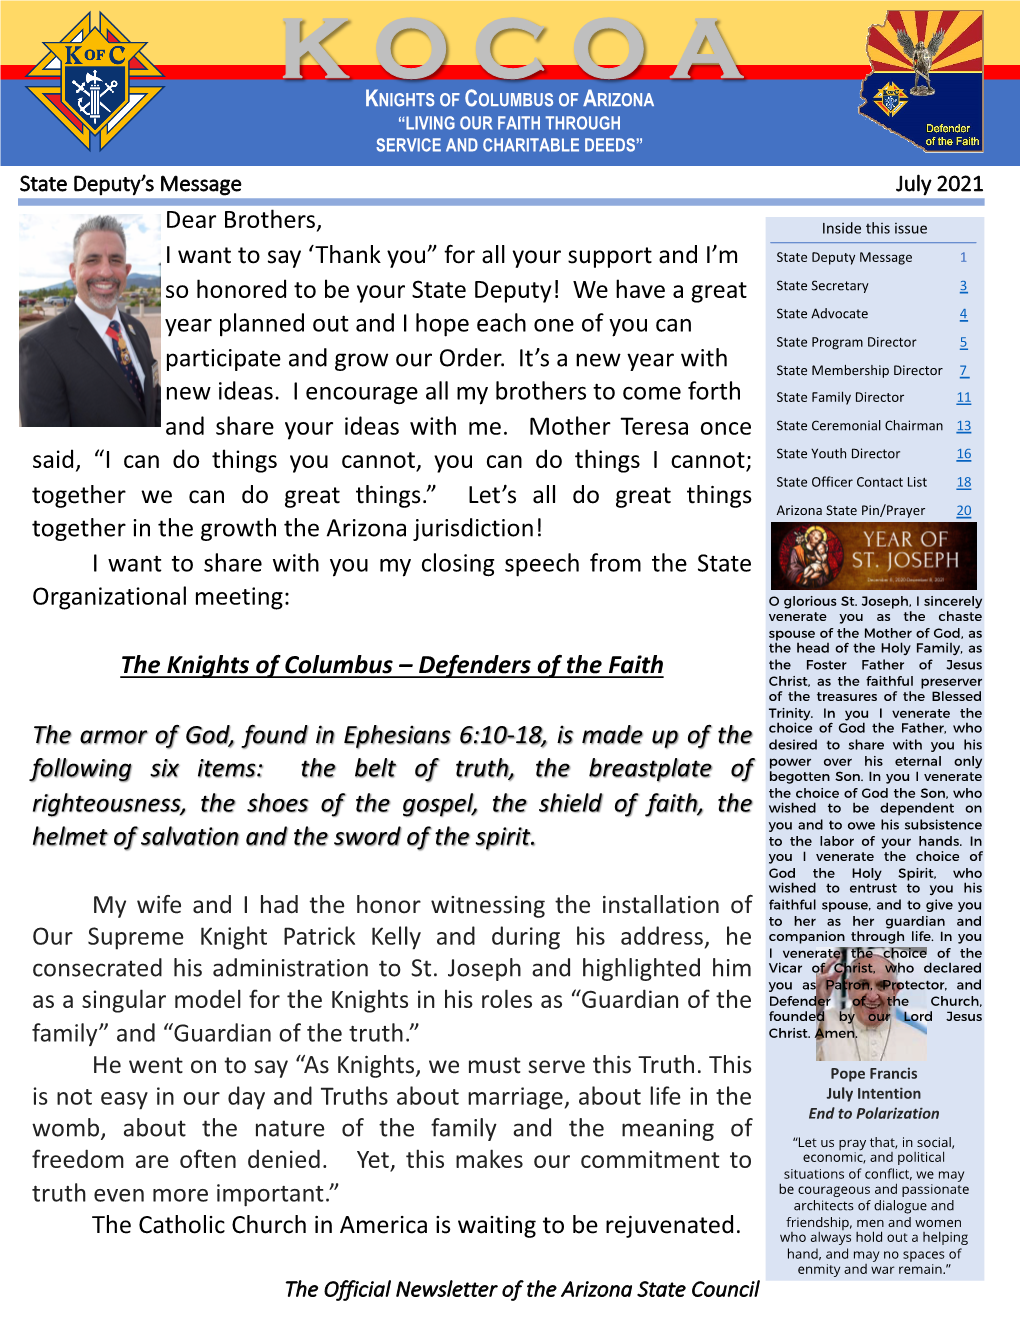 K O C O a KNIGHTS of COLUMBUS of ARIZONA “LIVING OUR FAITH THROUGH SERVICE and CHARITABLE DEEDS” State Deputy’S Message July 2021